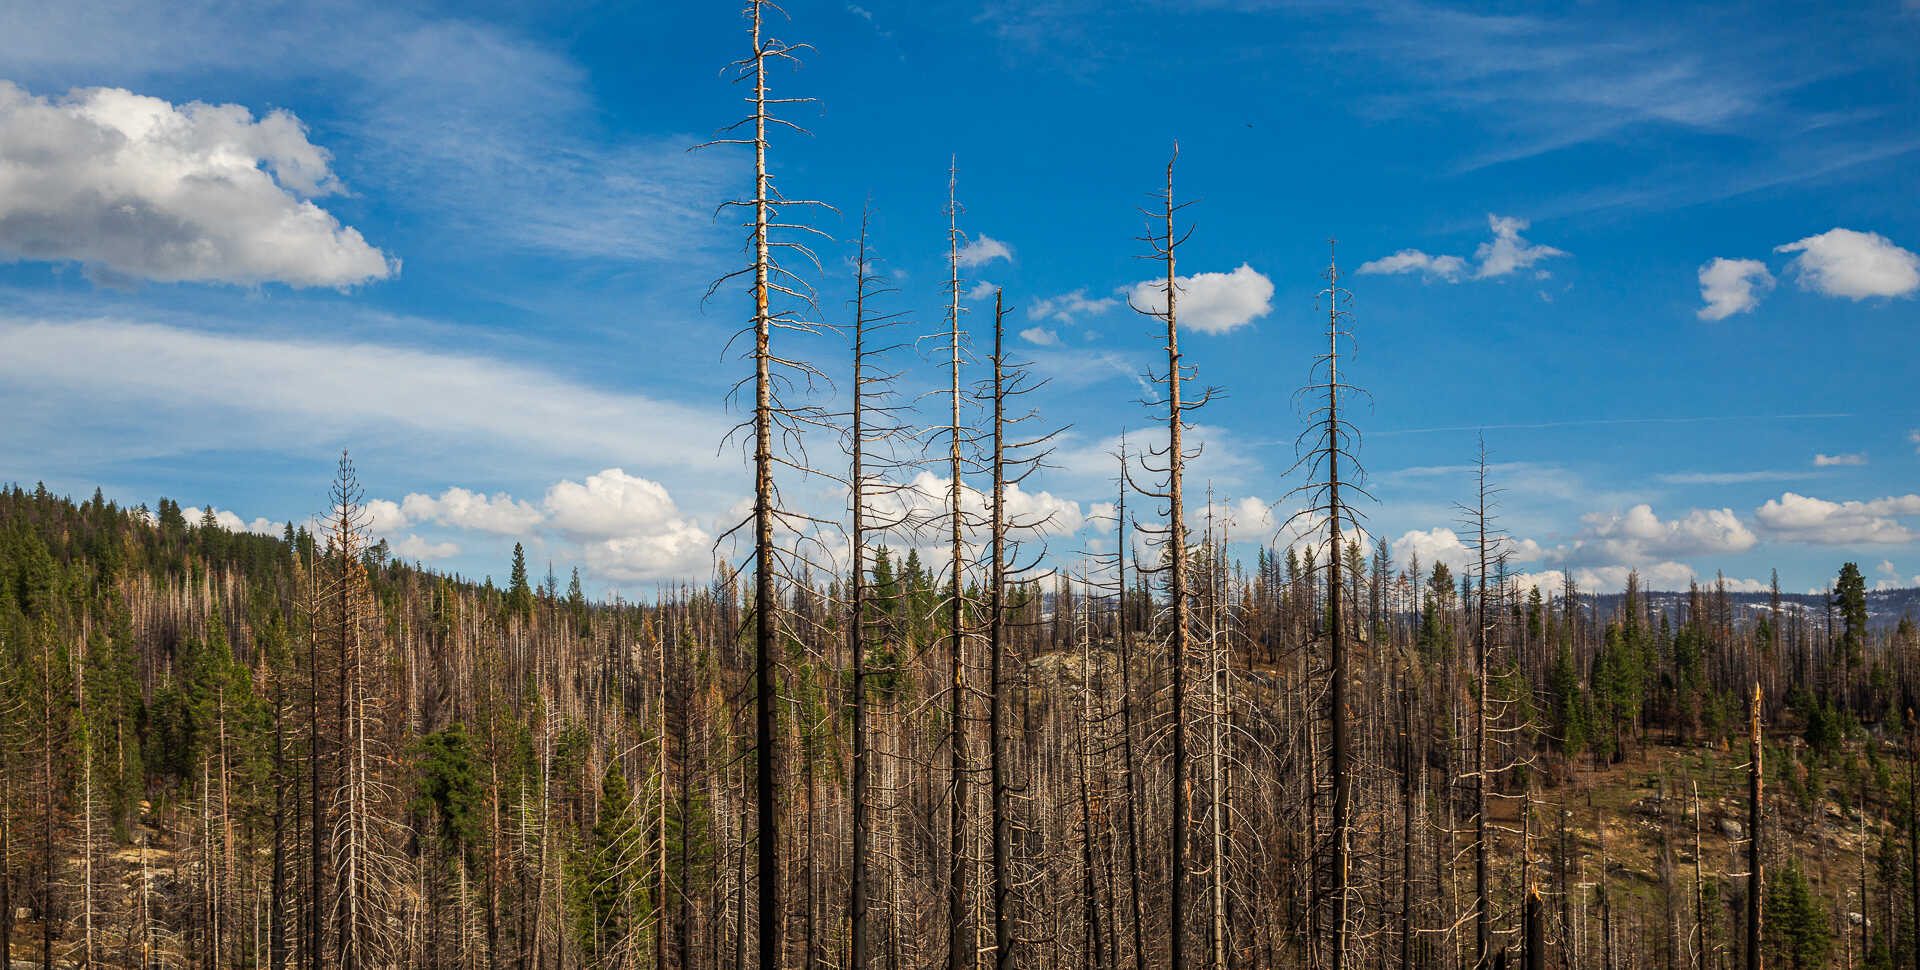 Landscape of burned forest in Caples Creek Watershed